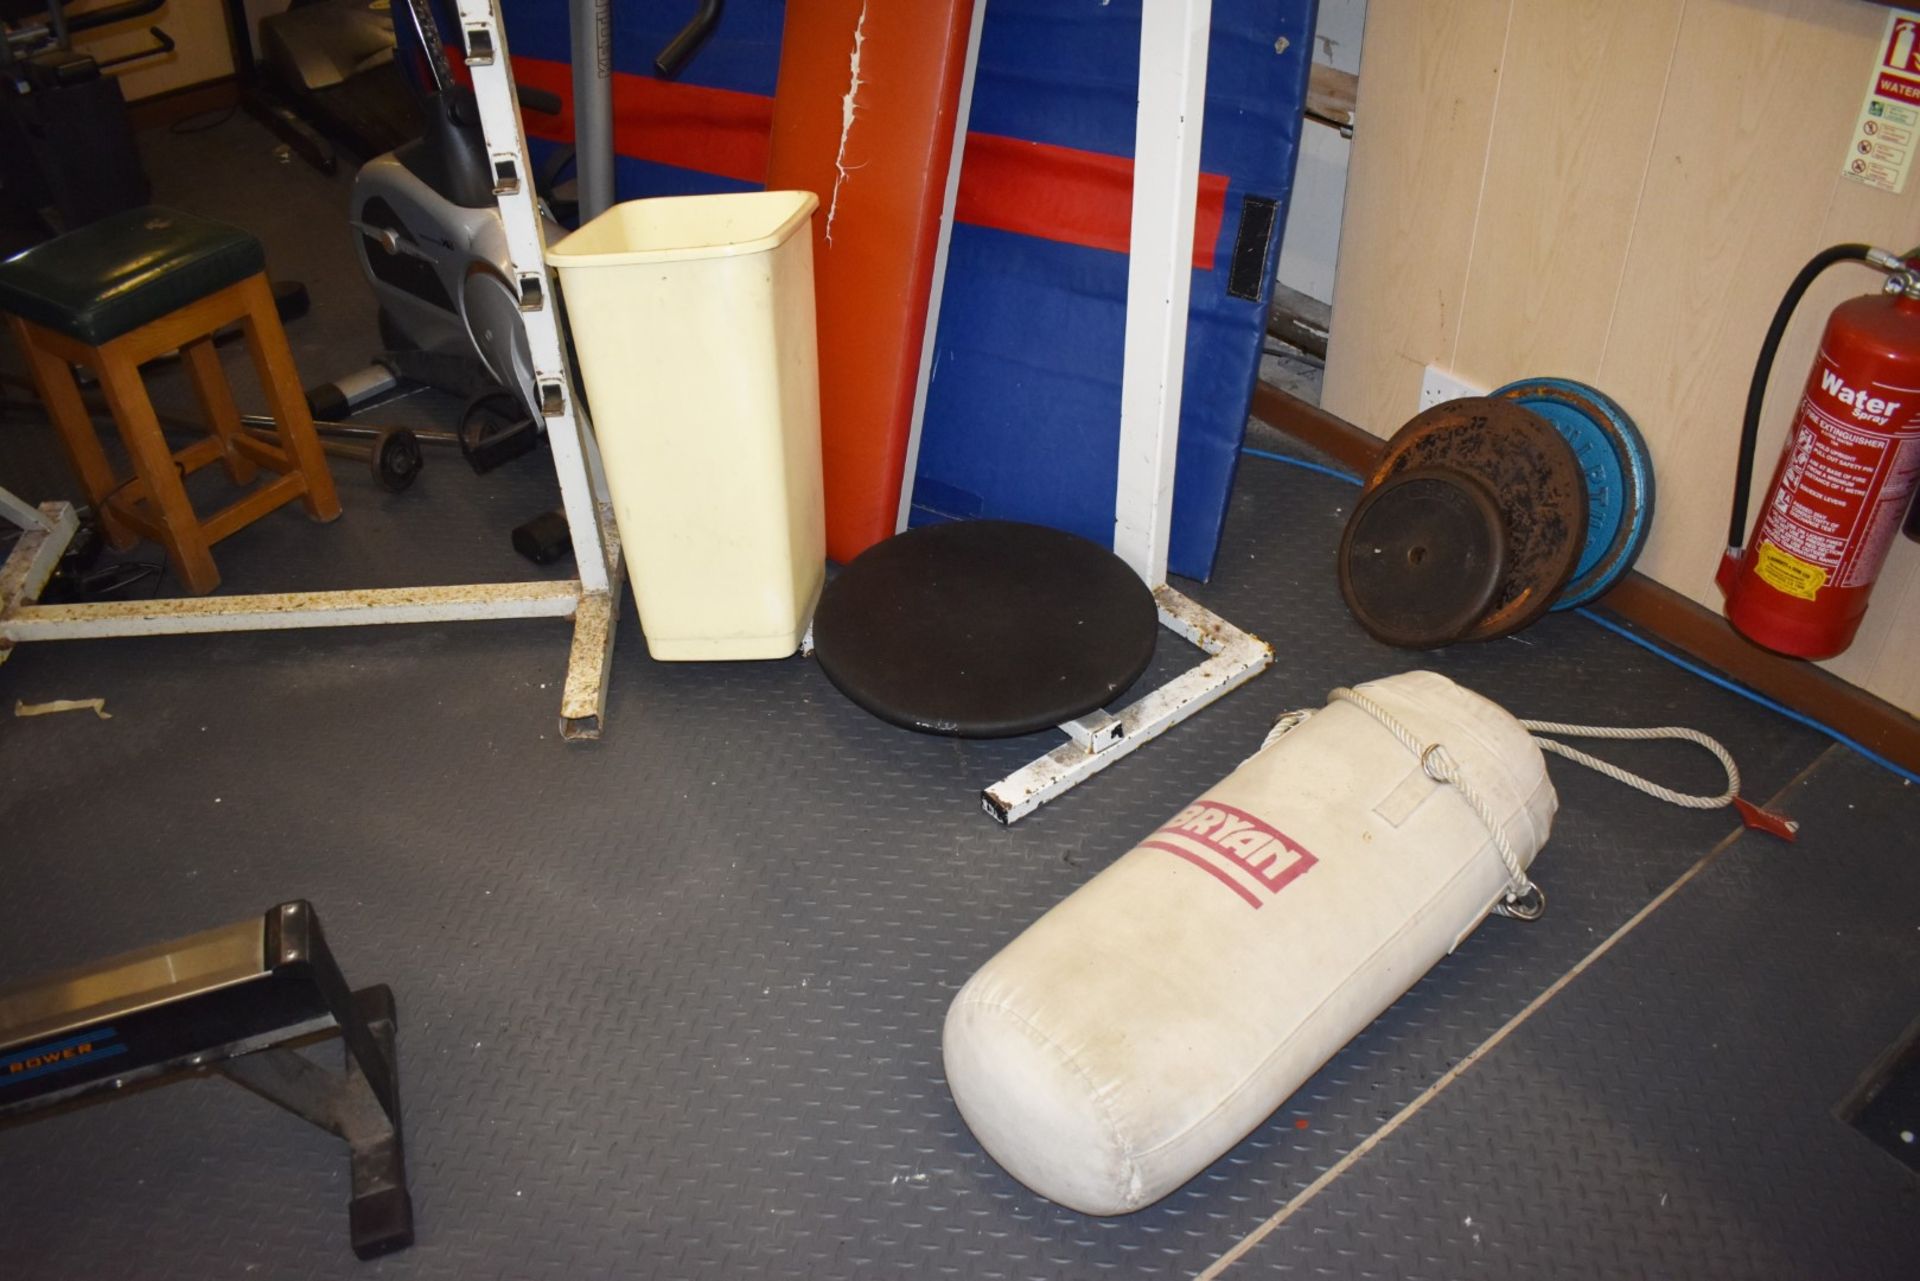 Contents of Bodybuilding and Strongman Gym - Includes Approx 30 Pieces of Gym Equipment, Floor Mats, - Image 79 of 95